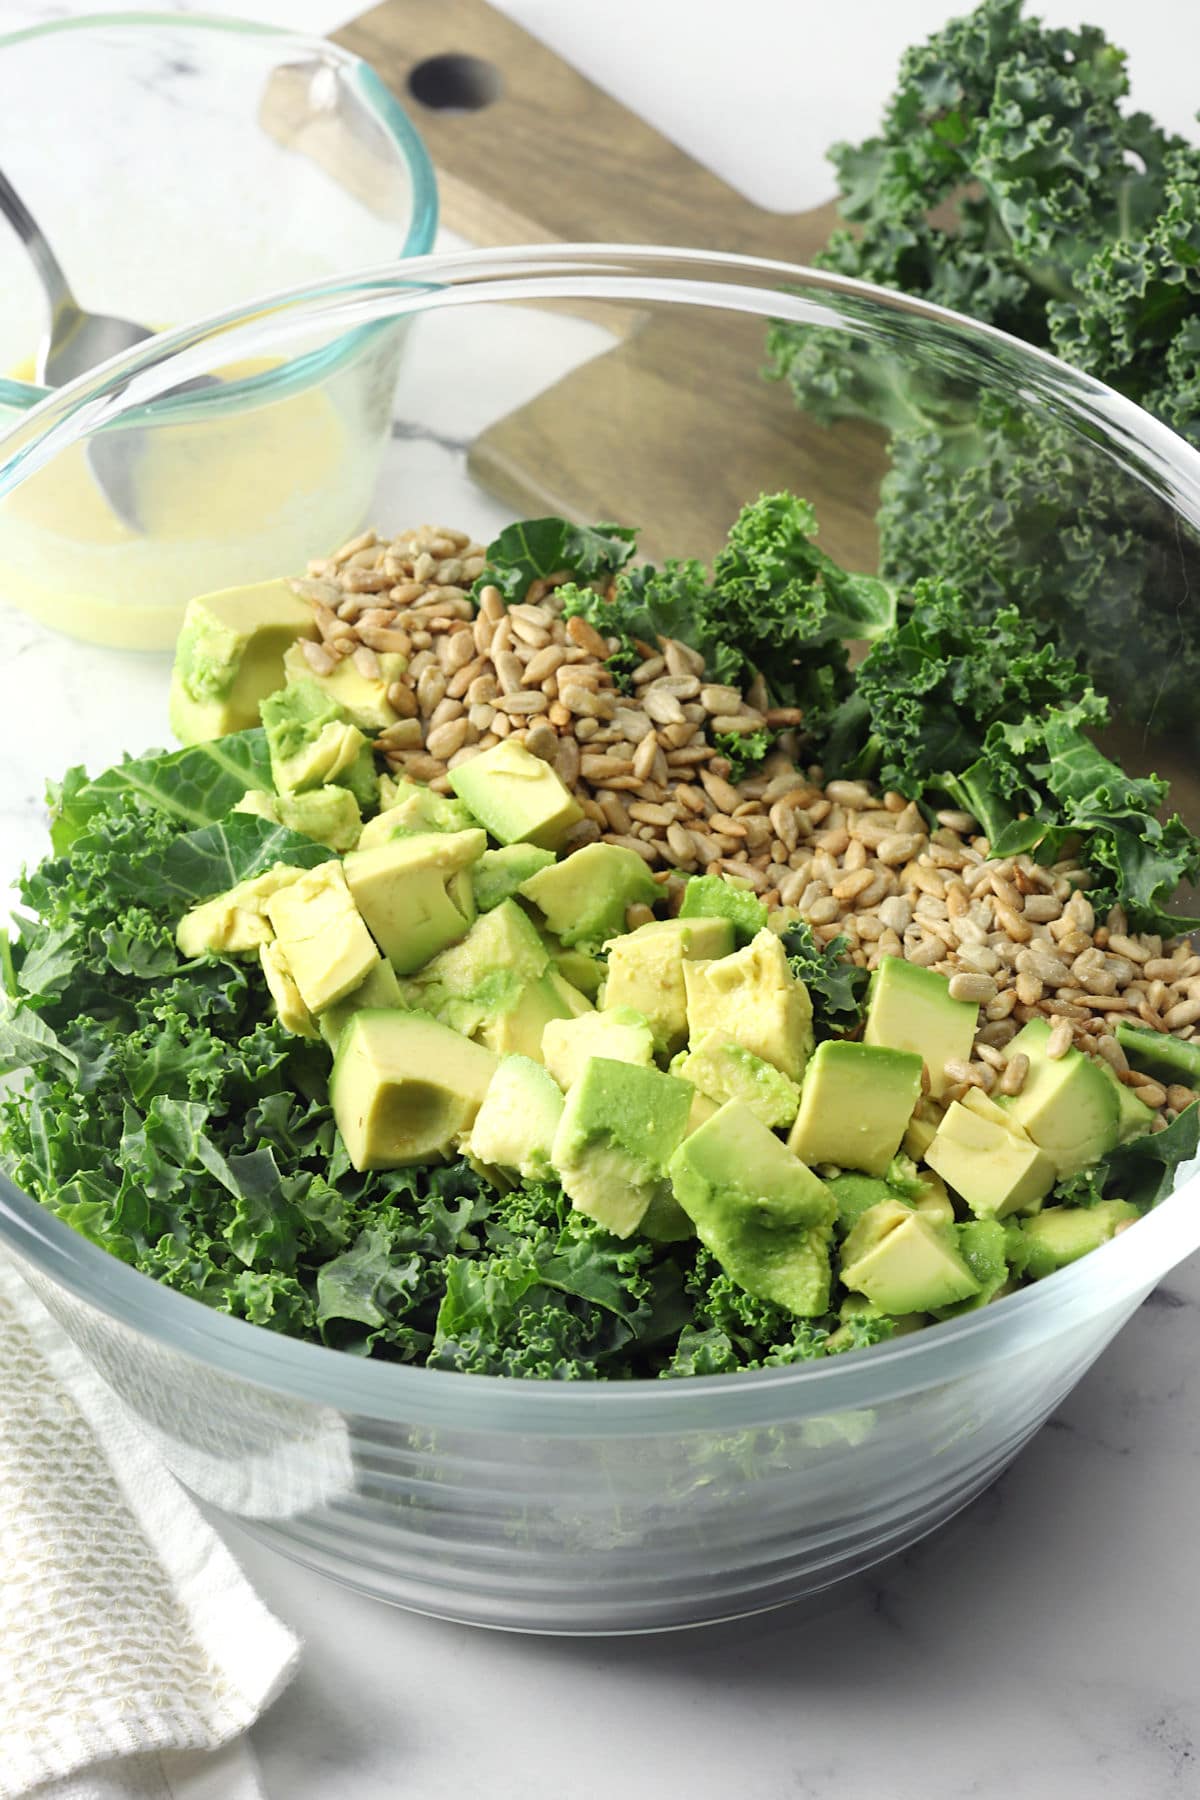 Chopped kale, avocado, and sunflower seeds in a large glass bowl.